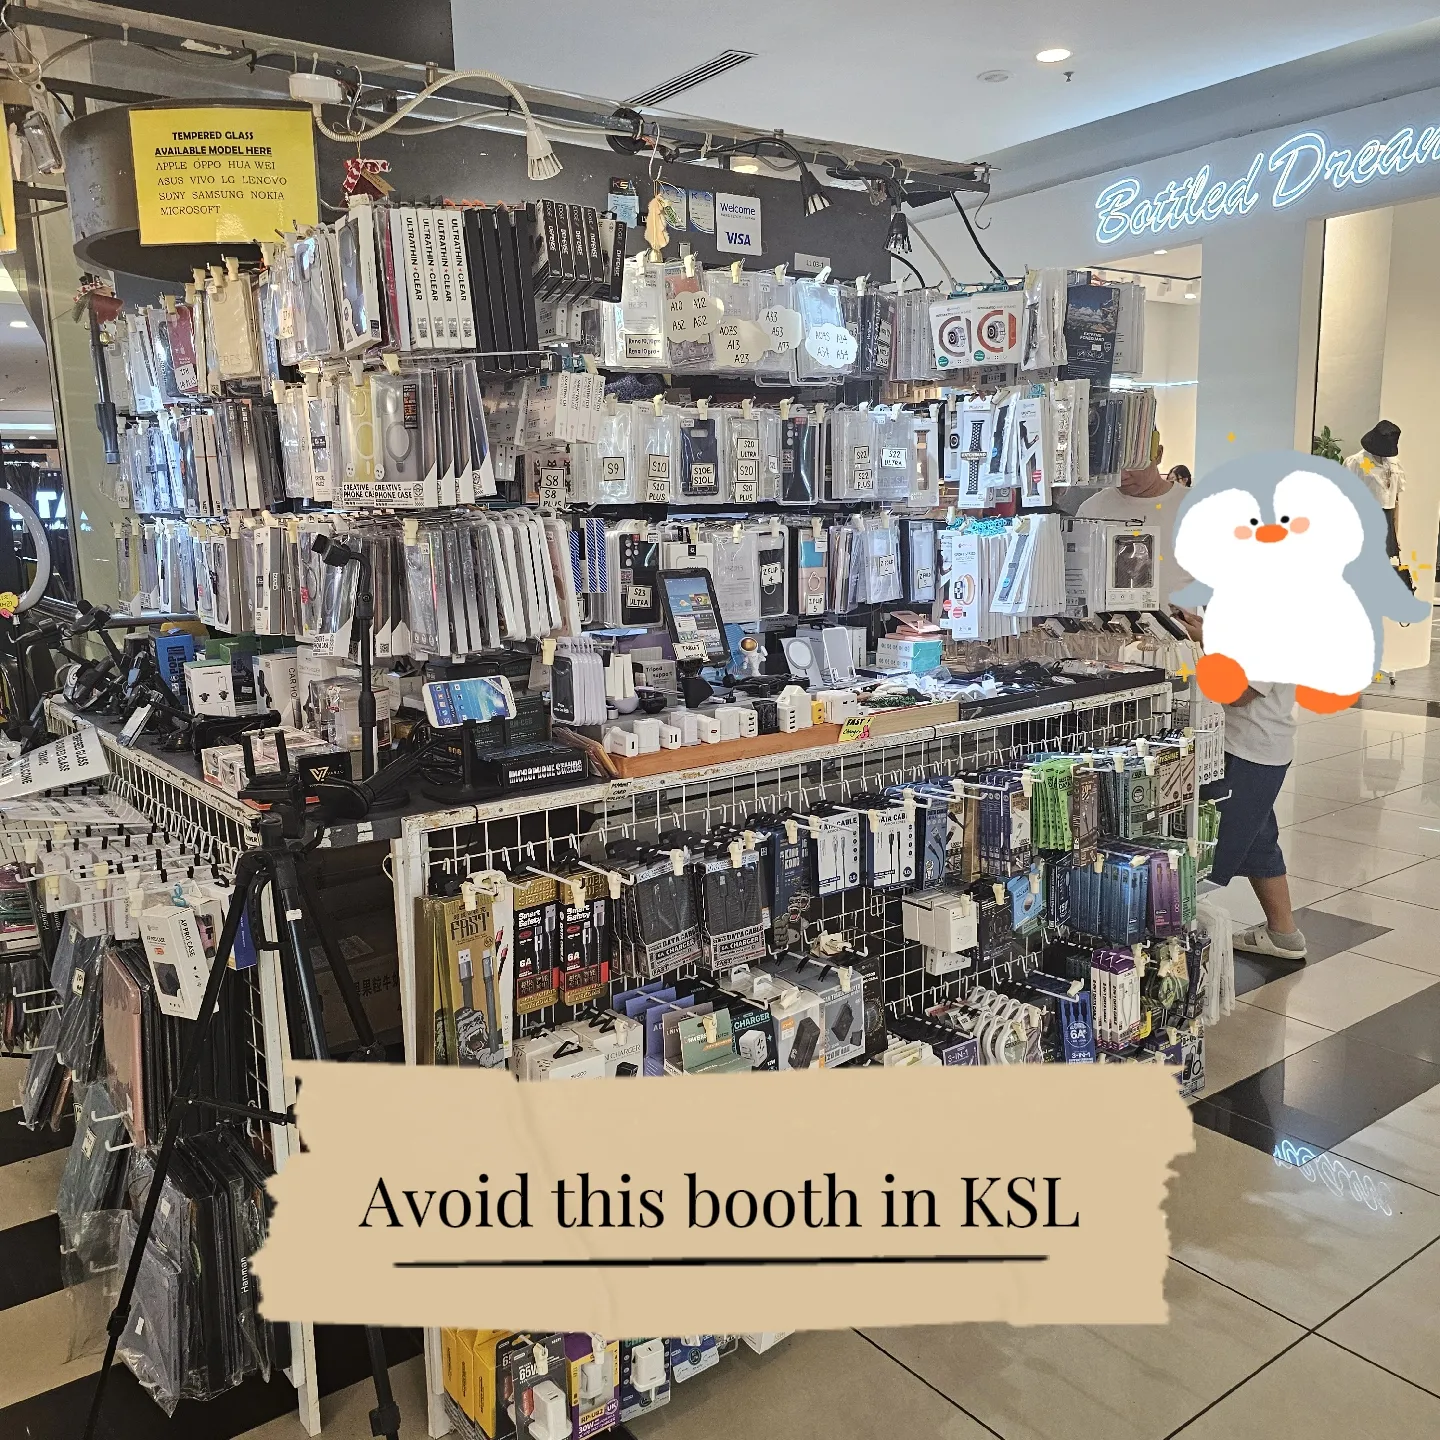 Avoid this booth in KSL's images